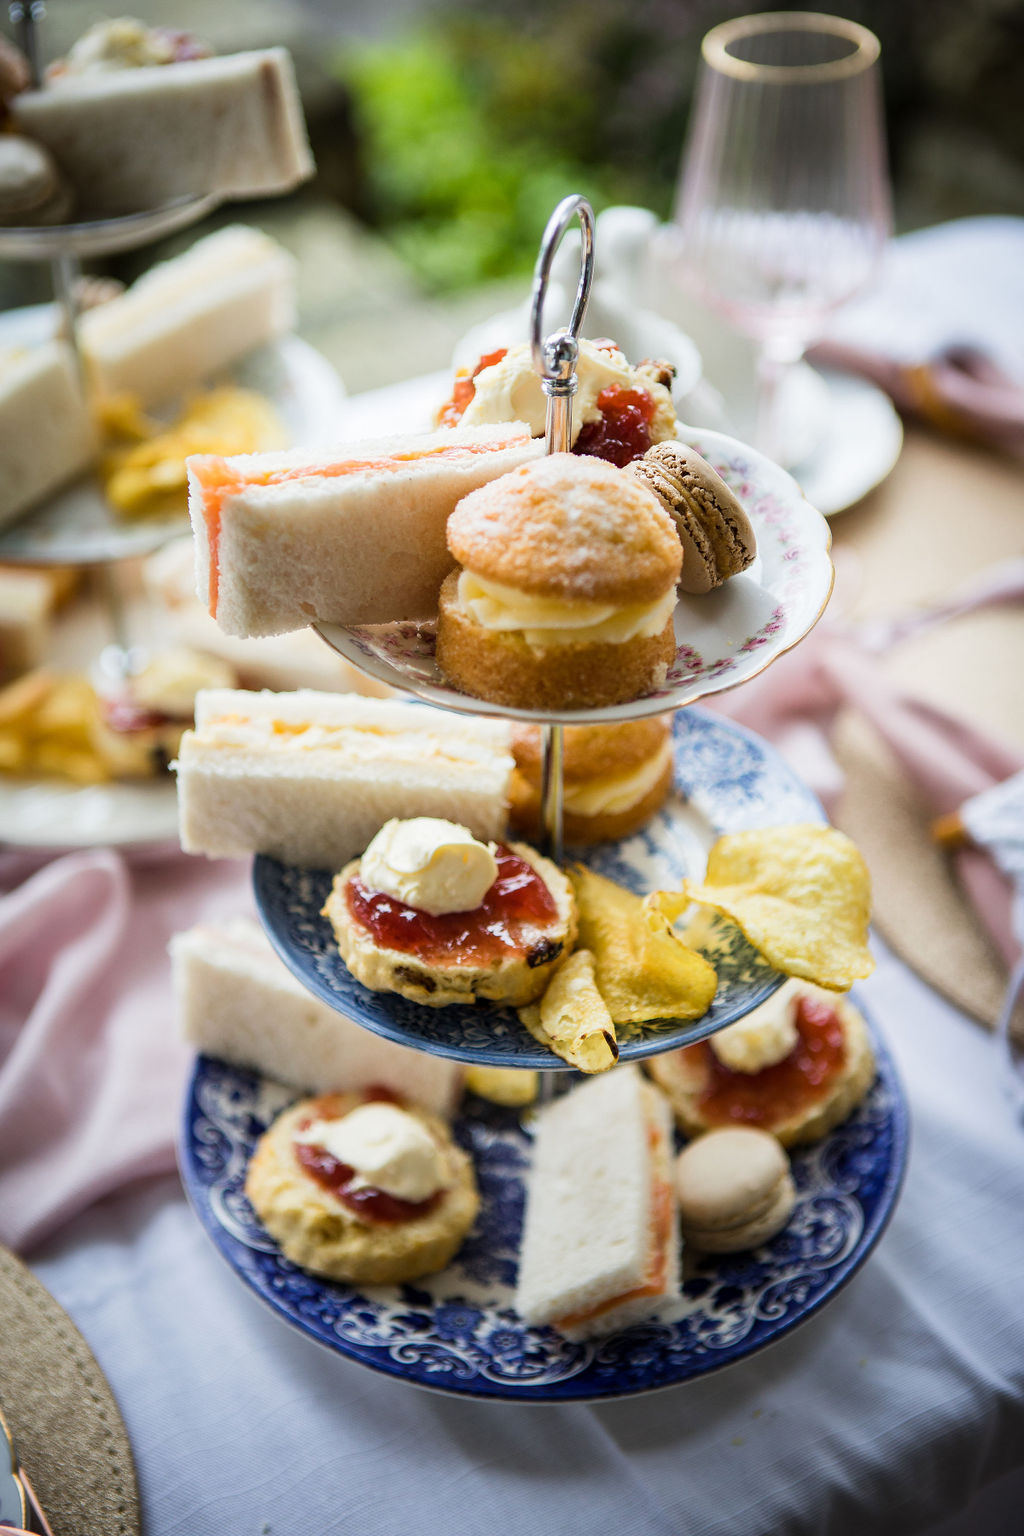 Afternoon tea for two (Tue)